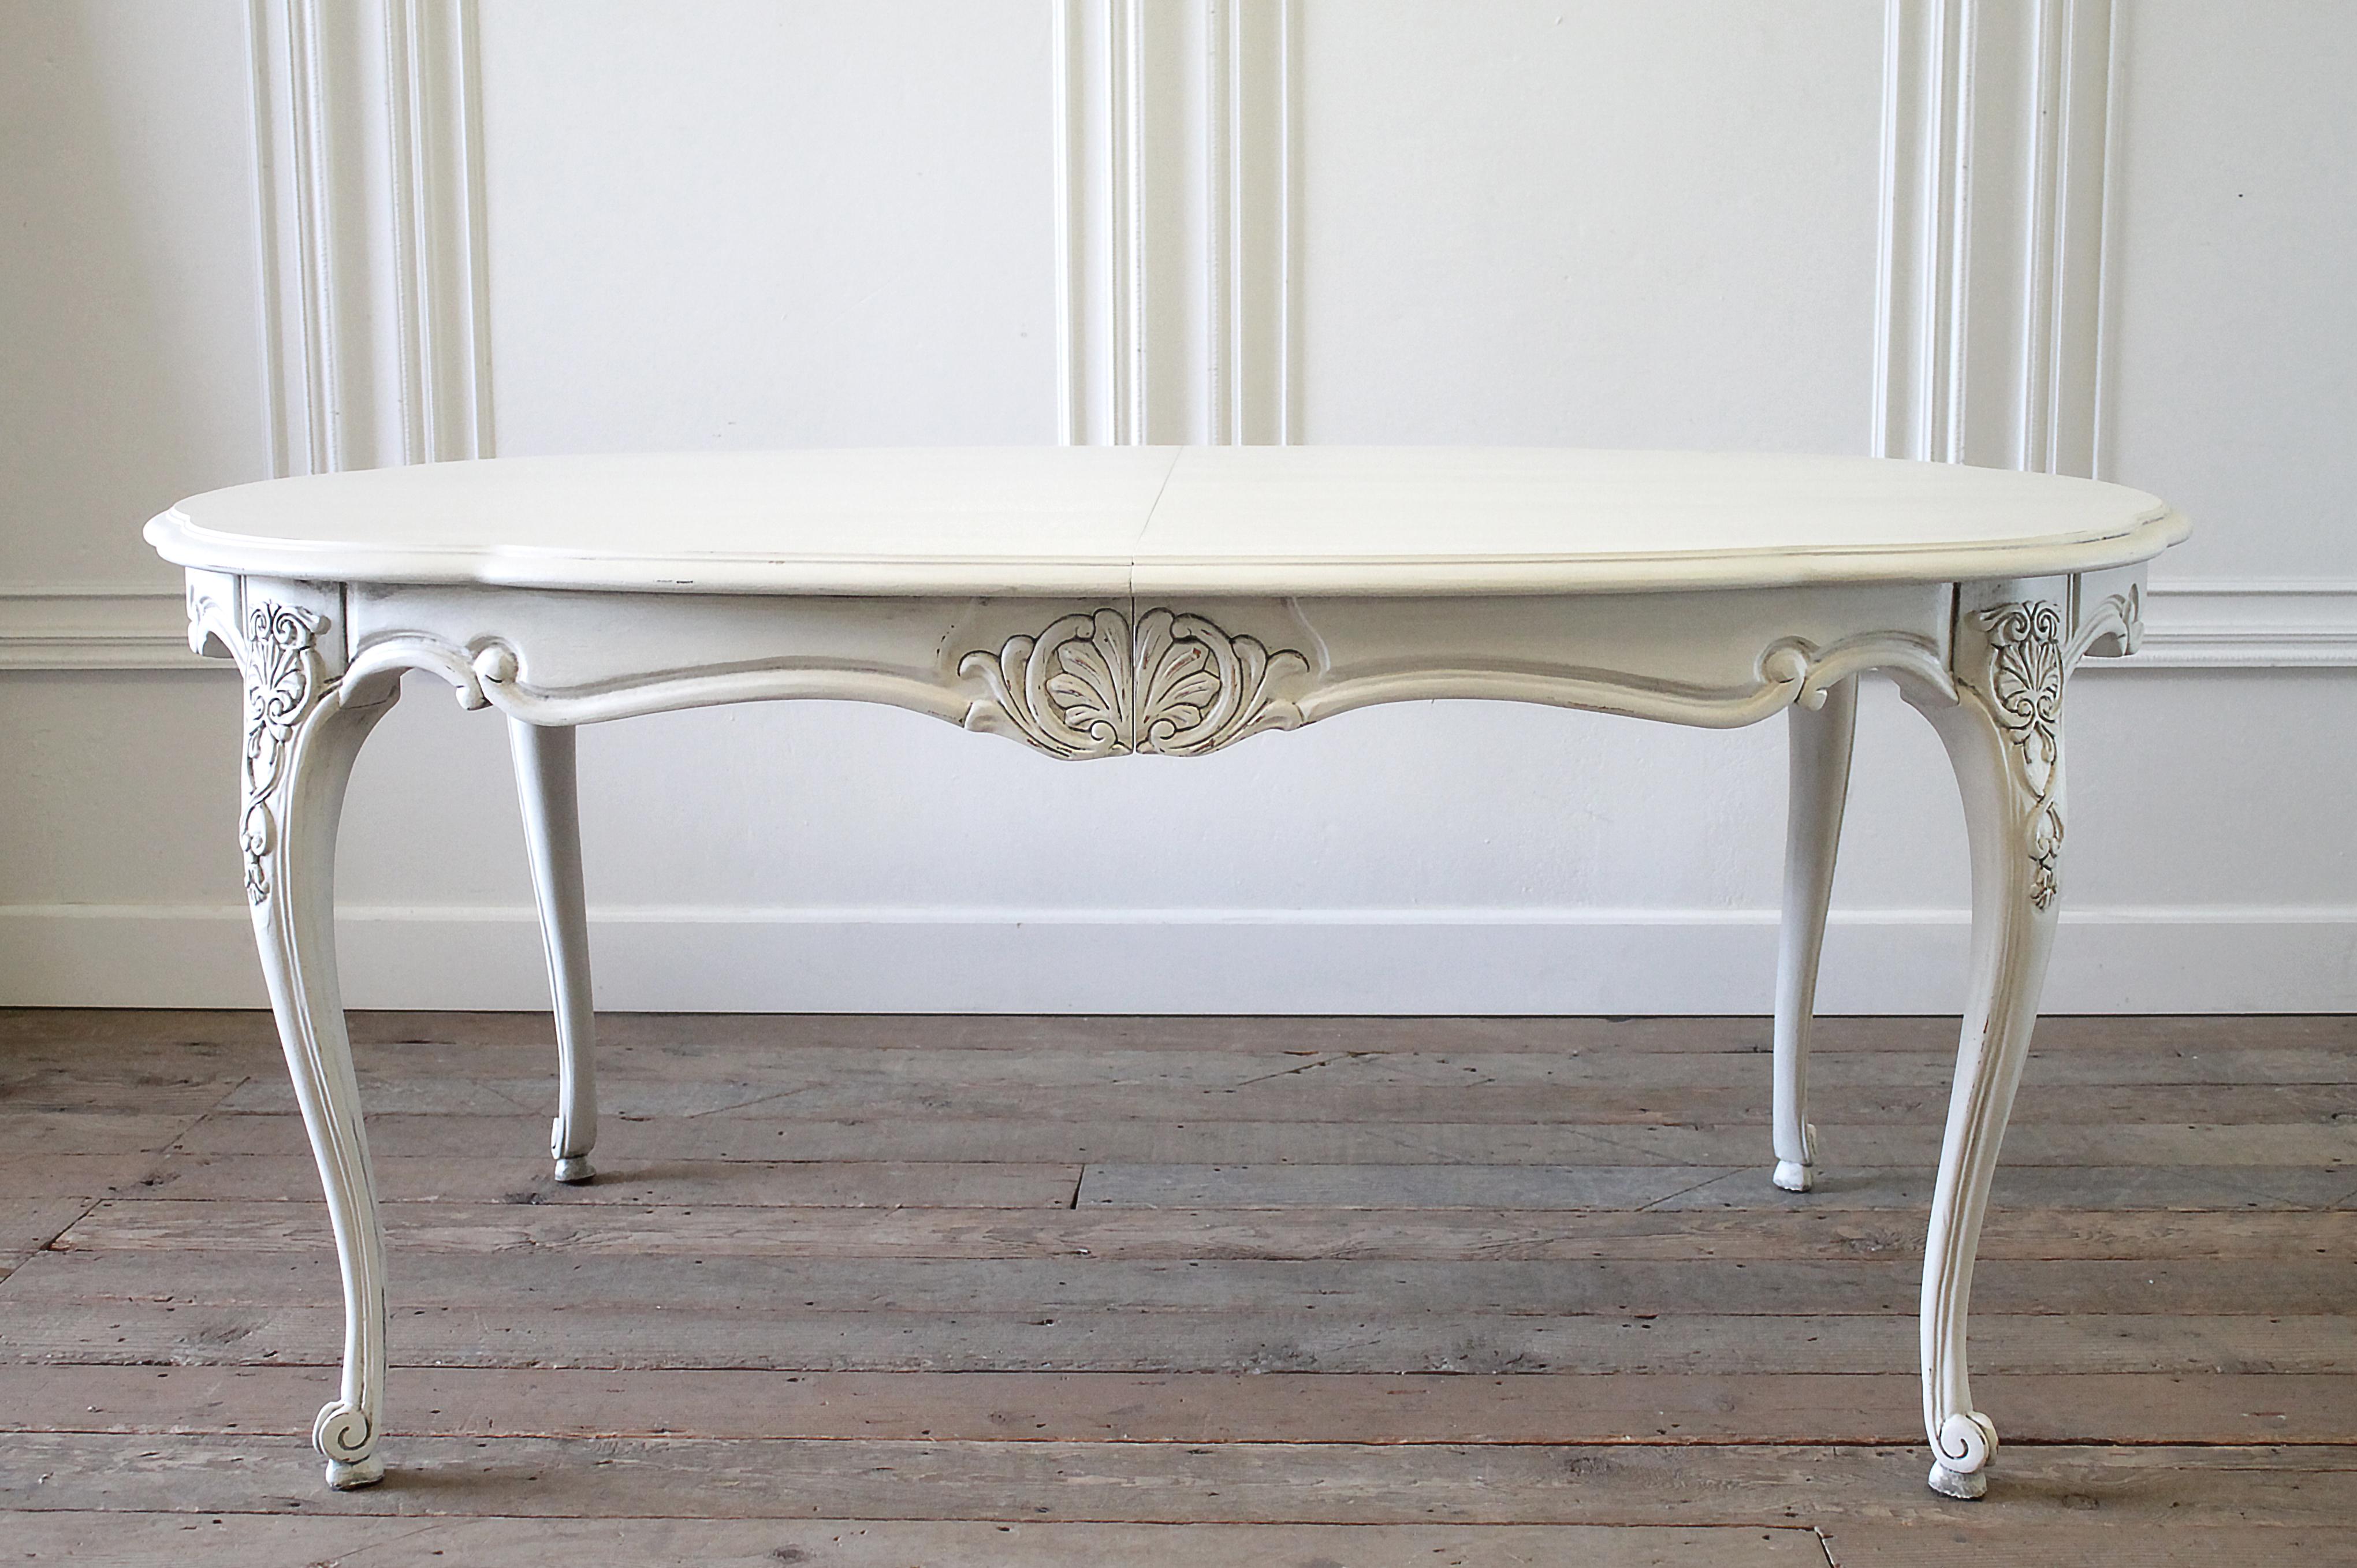 20th century carved Louis XV style dining table with leaves
This dining table comes with two large extensions leaves that have the same carving on the apron to give a complete finished look. Painted in a soft oyster white, with subtle distressed